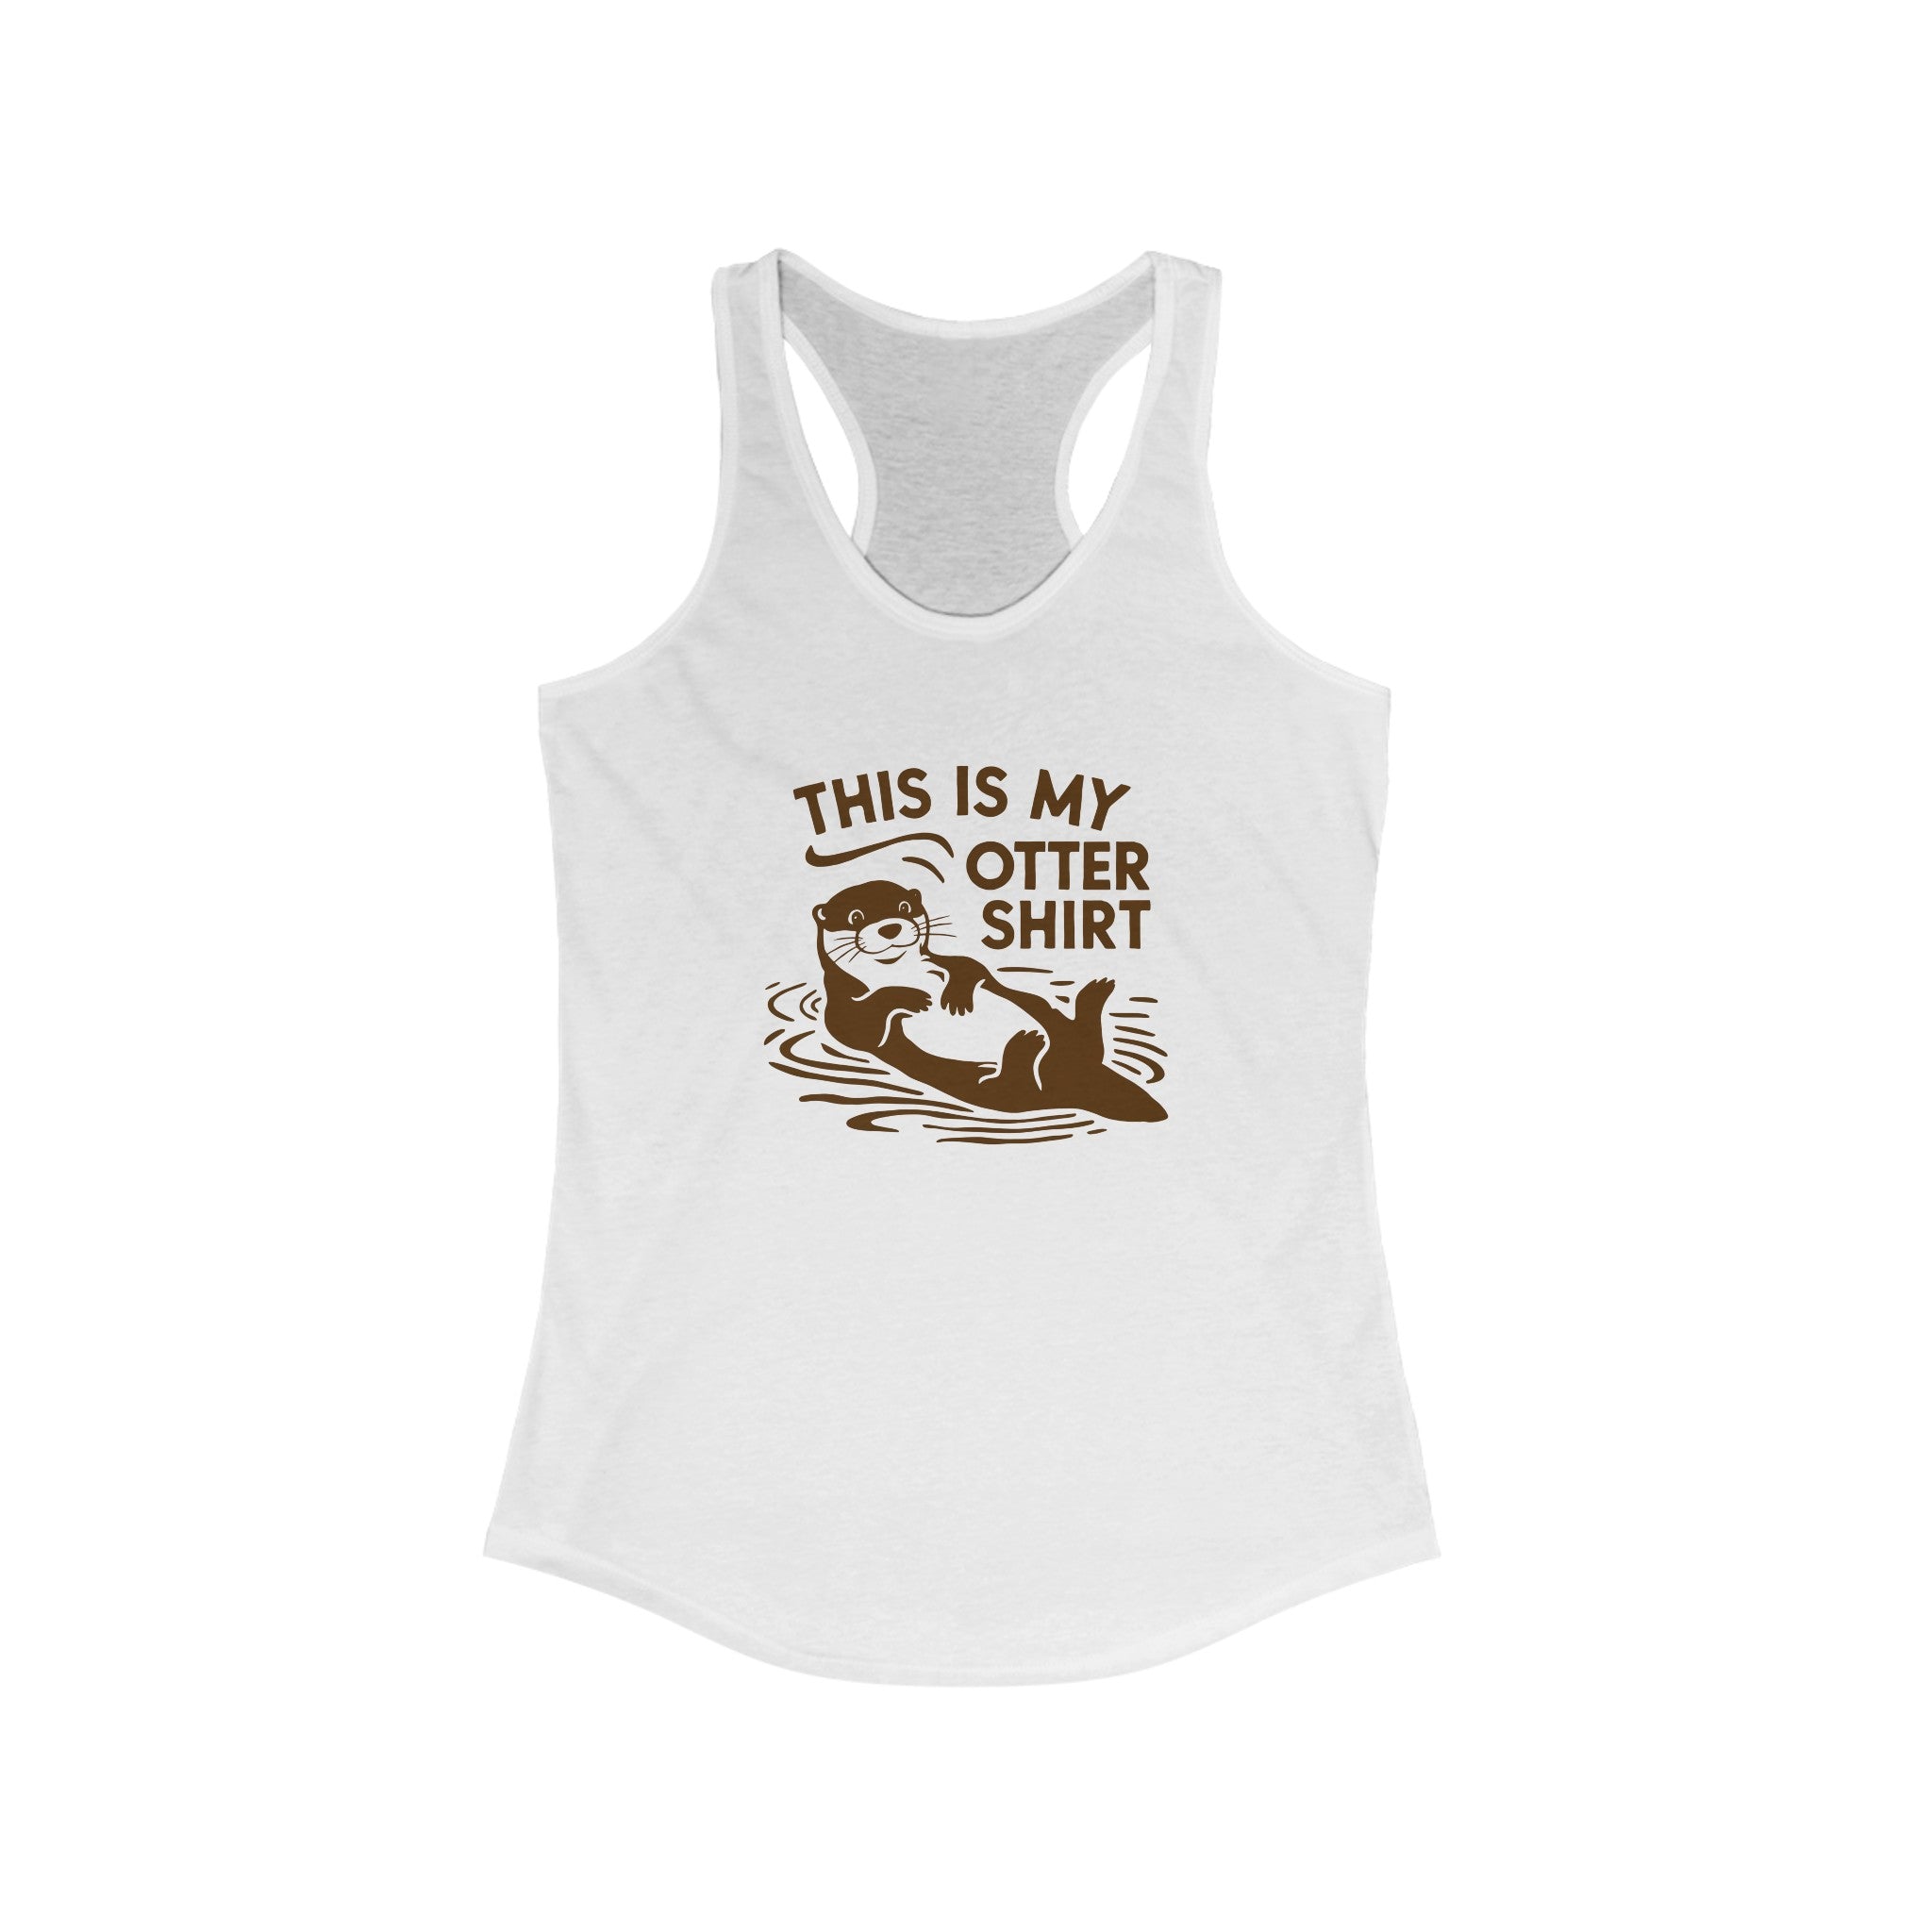 The My Otter Shirt - Women's Racerback Tank displays a graphic of an otter floating on its back with the text "This is my otter shirt" above it, perfect for an active lifestyle.